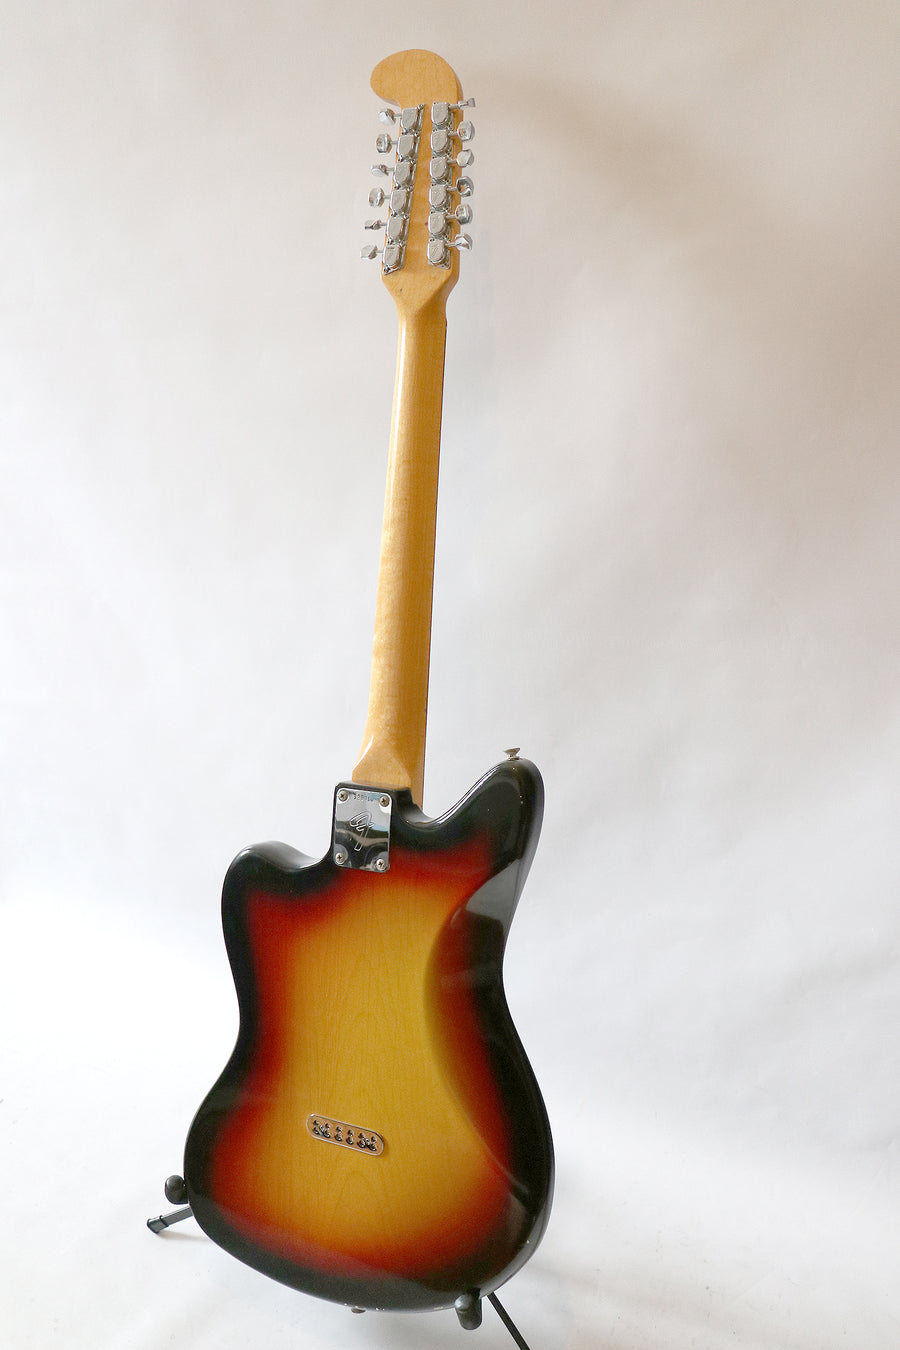 Fender XII 1966 - 12 String Electric